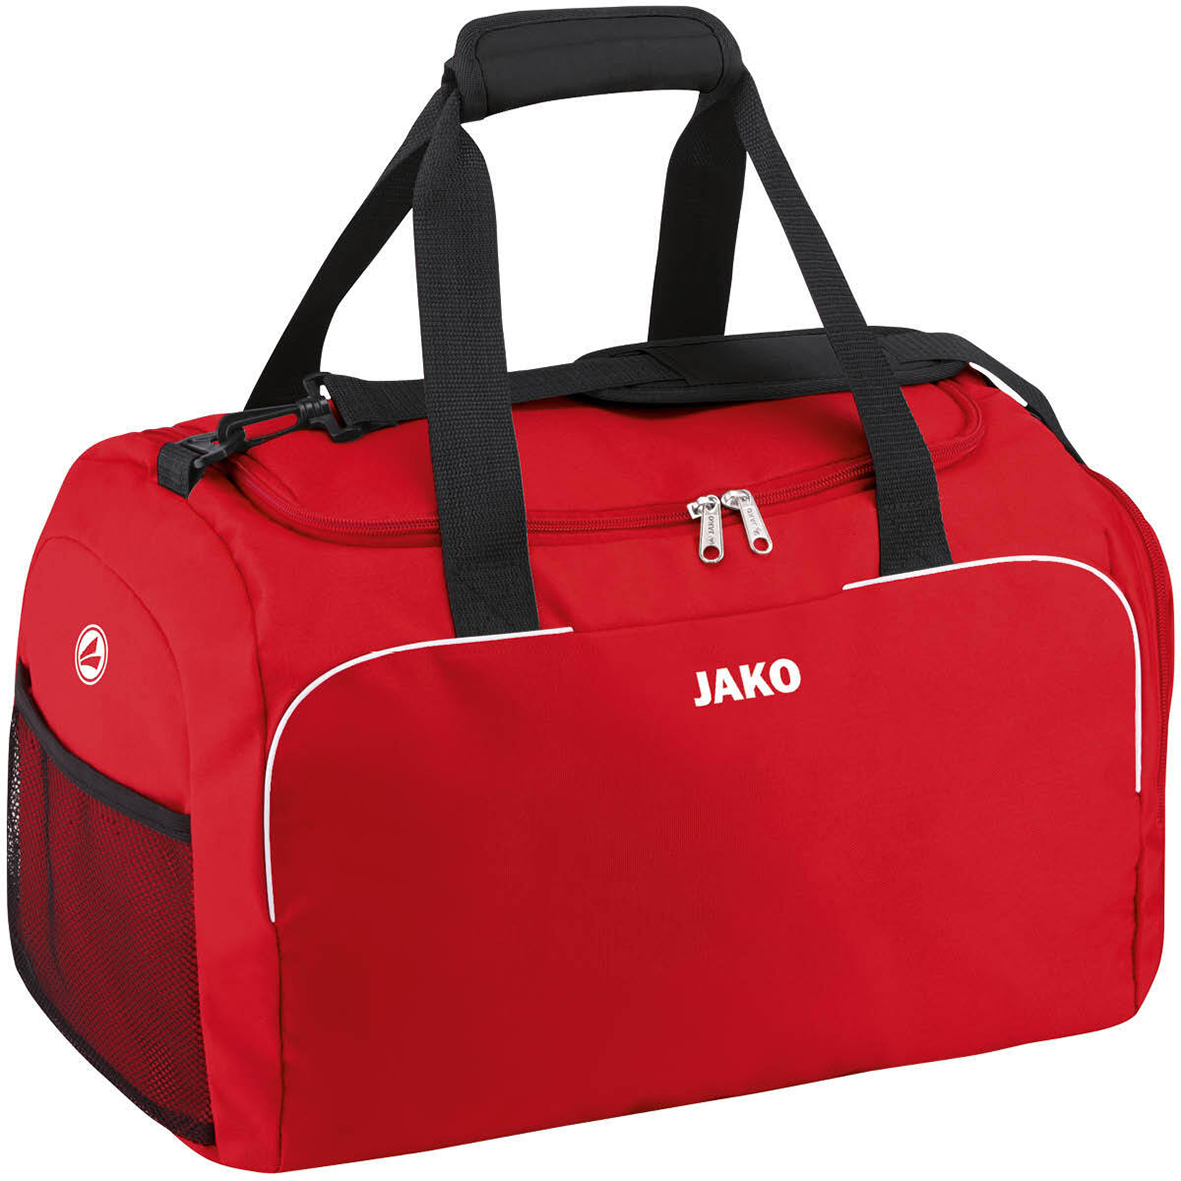 SPORTS BAG JAKO CLASSICO WITH SIDE WET COMPARTMENTS, RED.